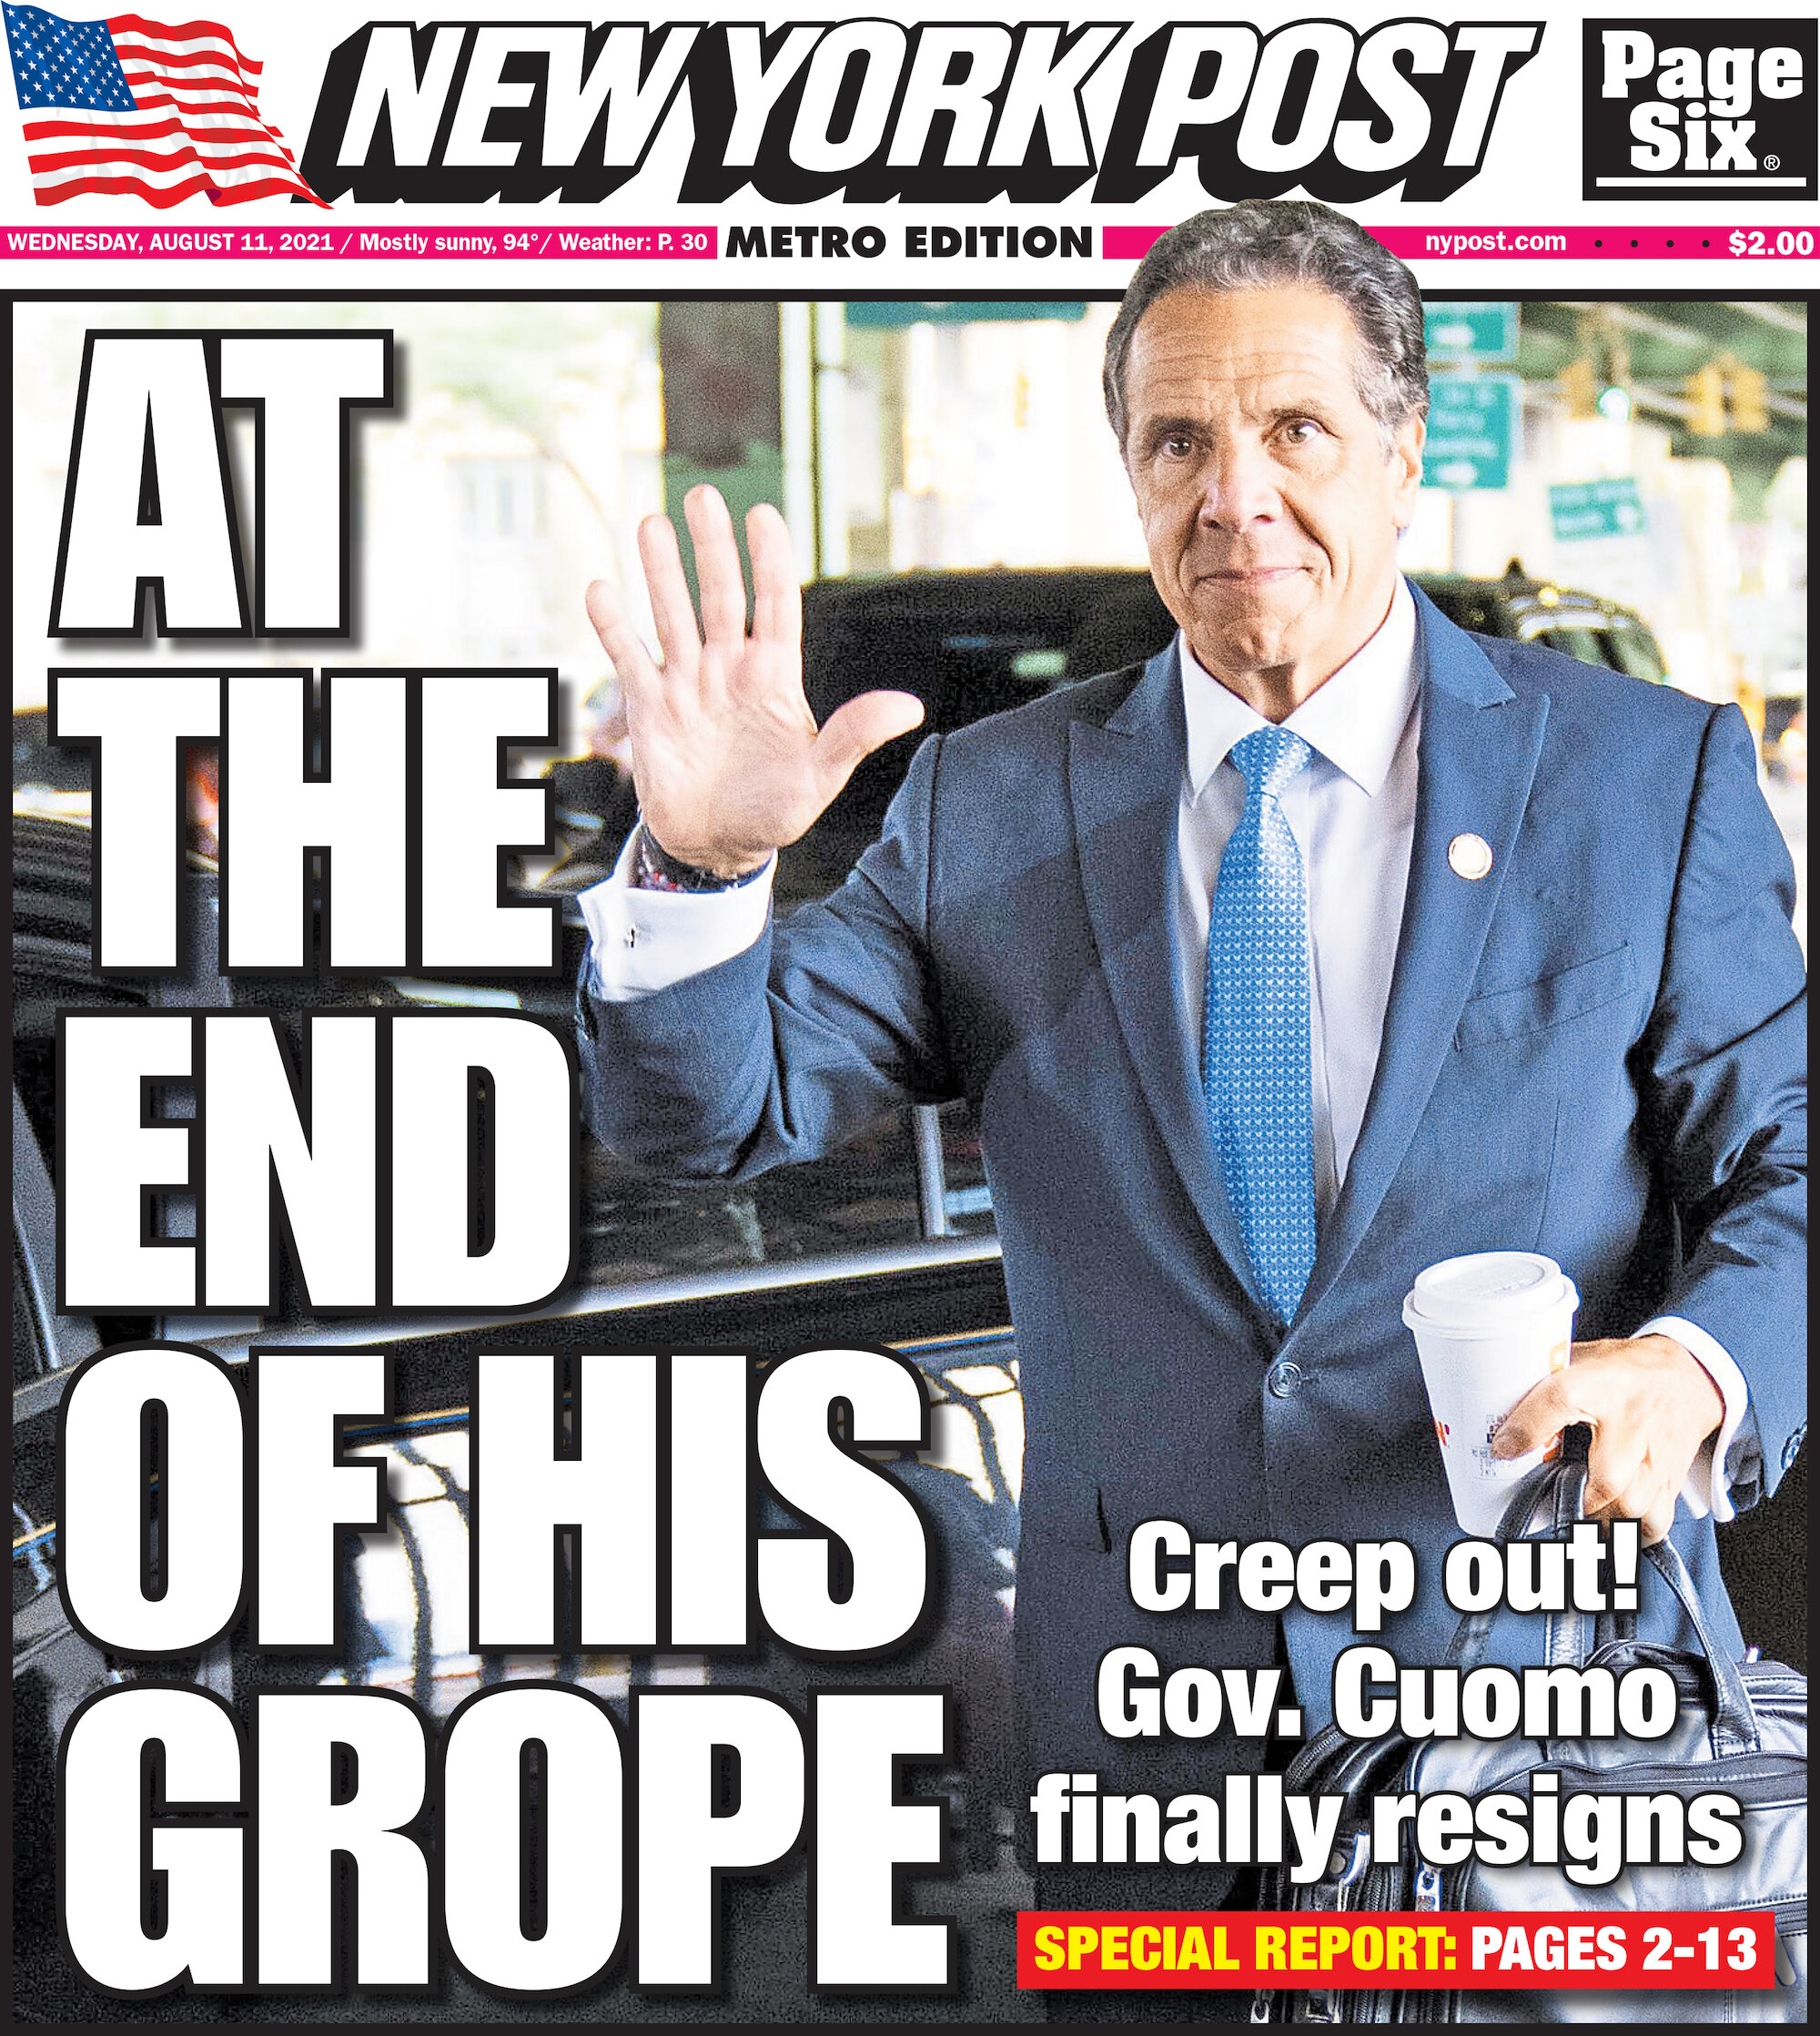 The Fall Of The House Of Cuomo — Kerry: